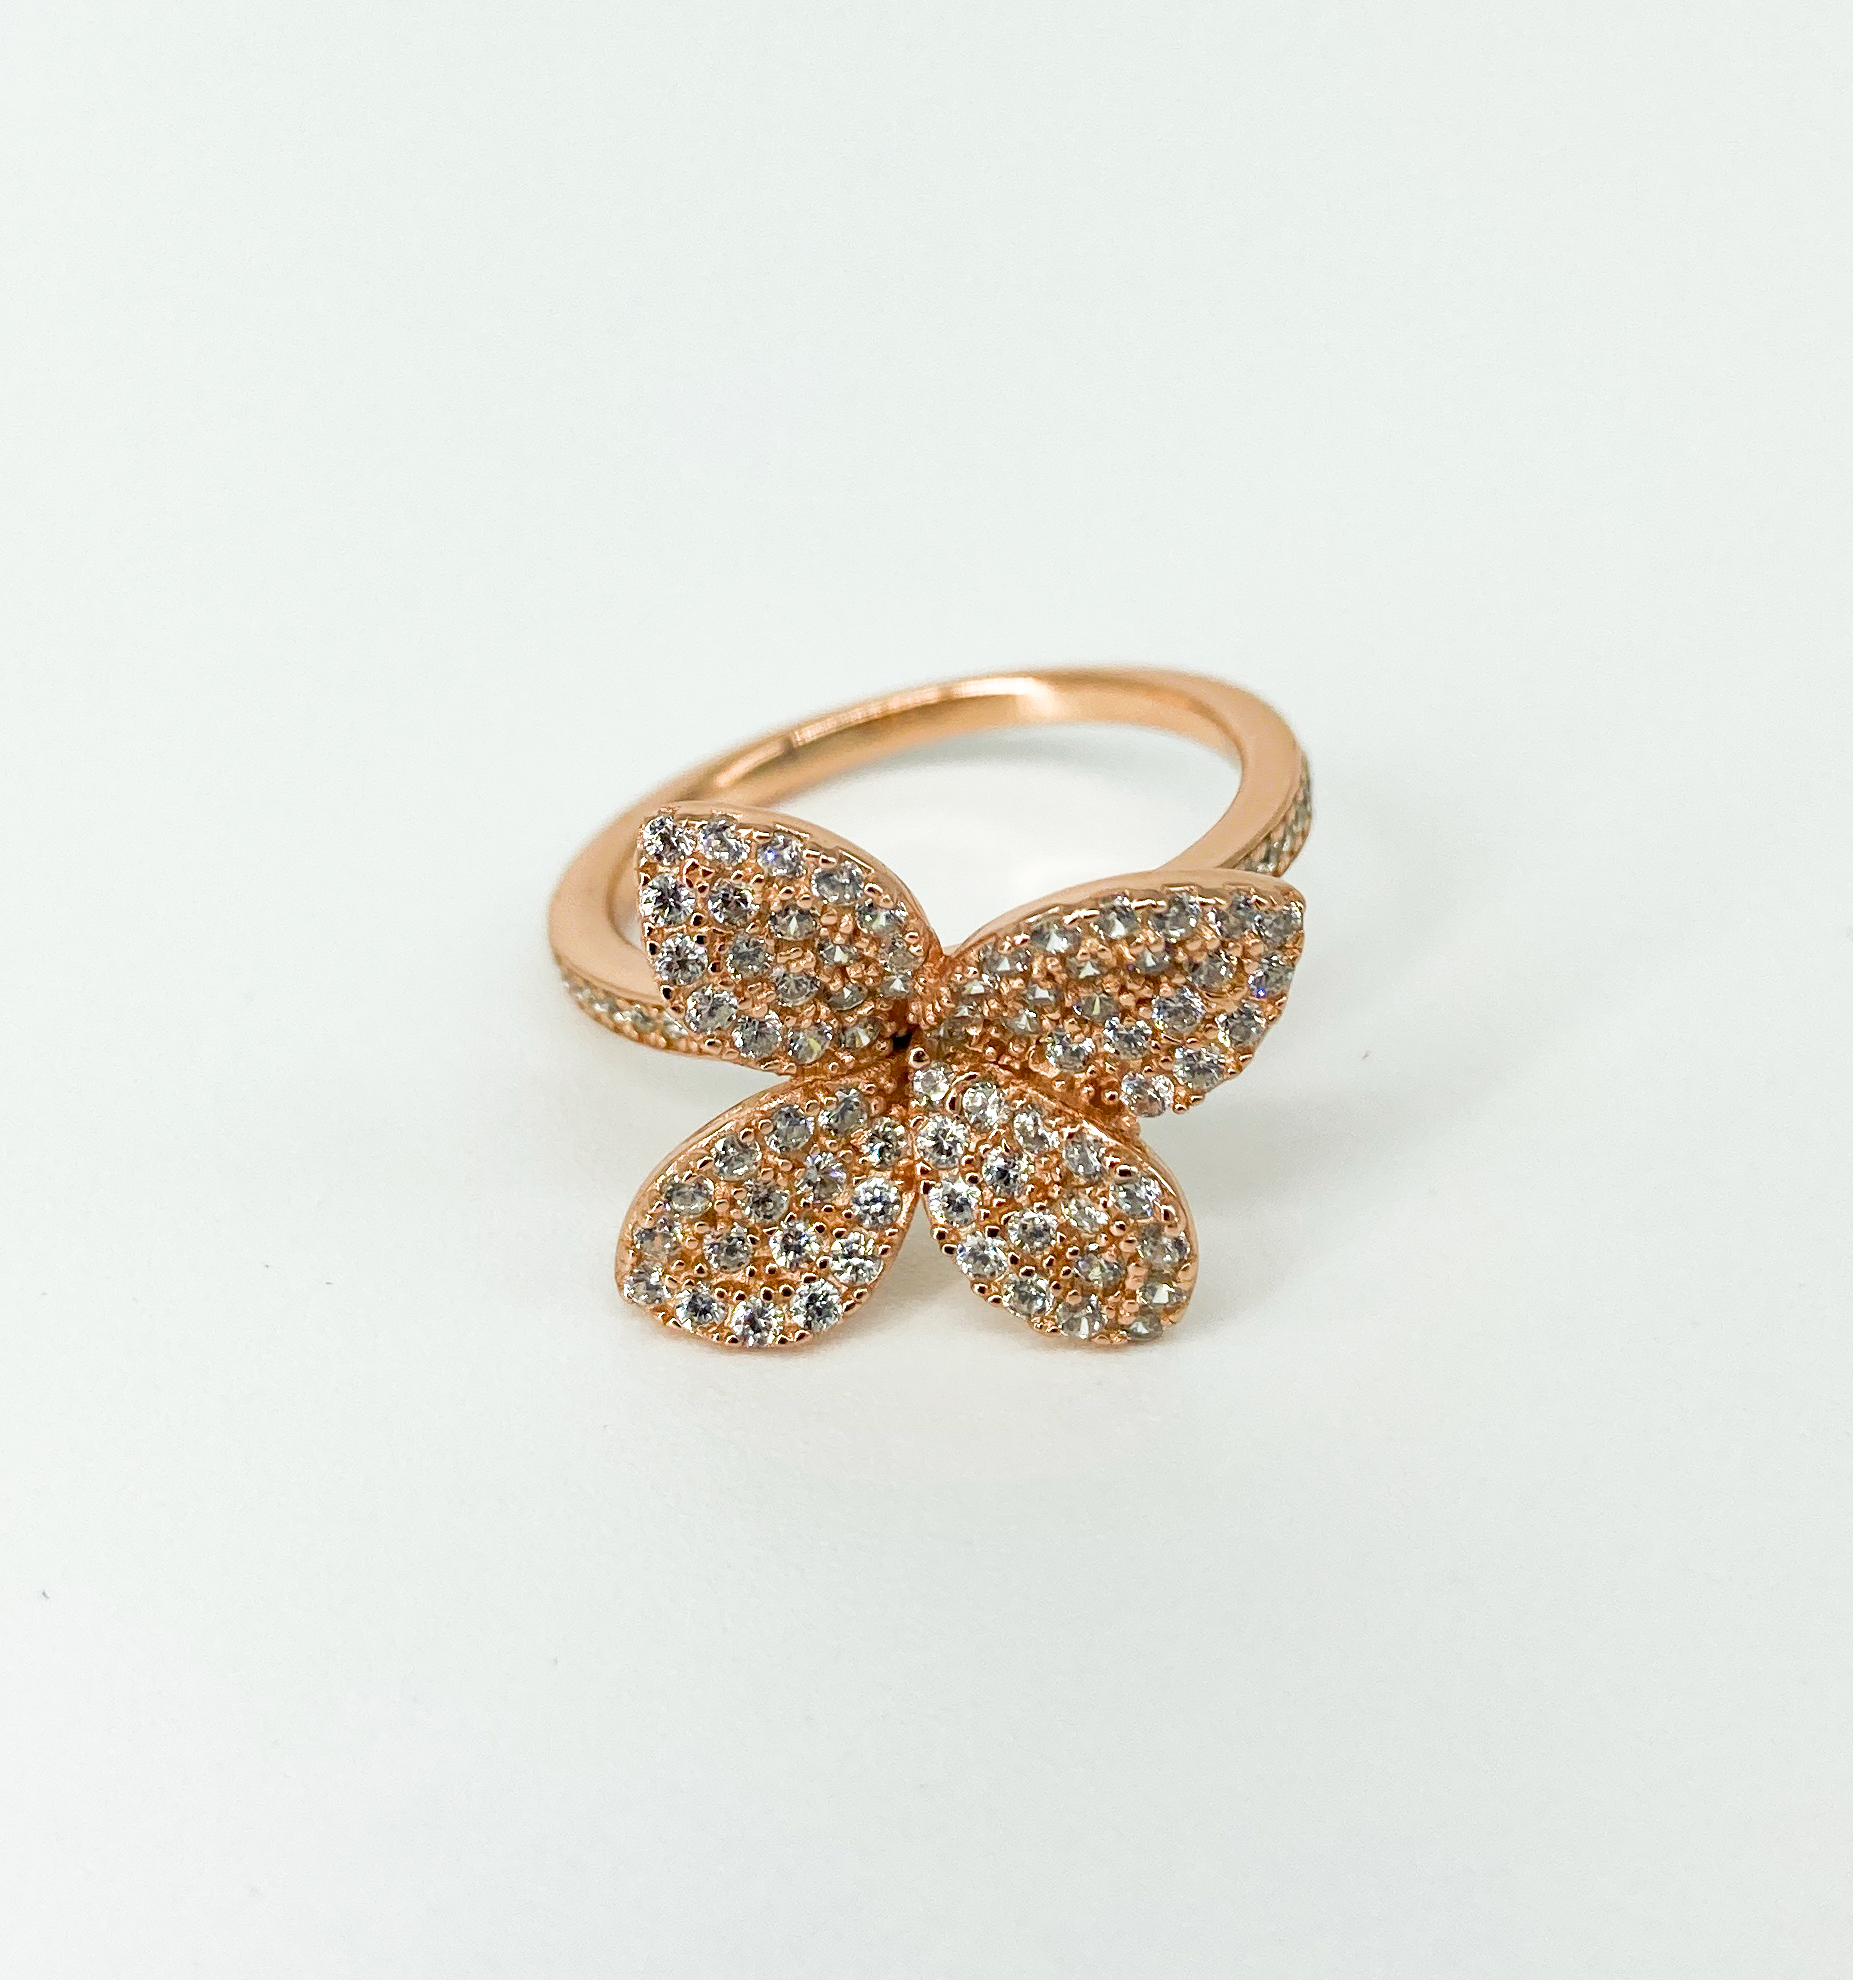 “Floral Chic” Gold Ring